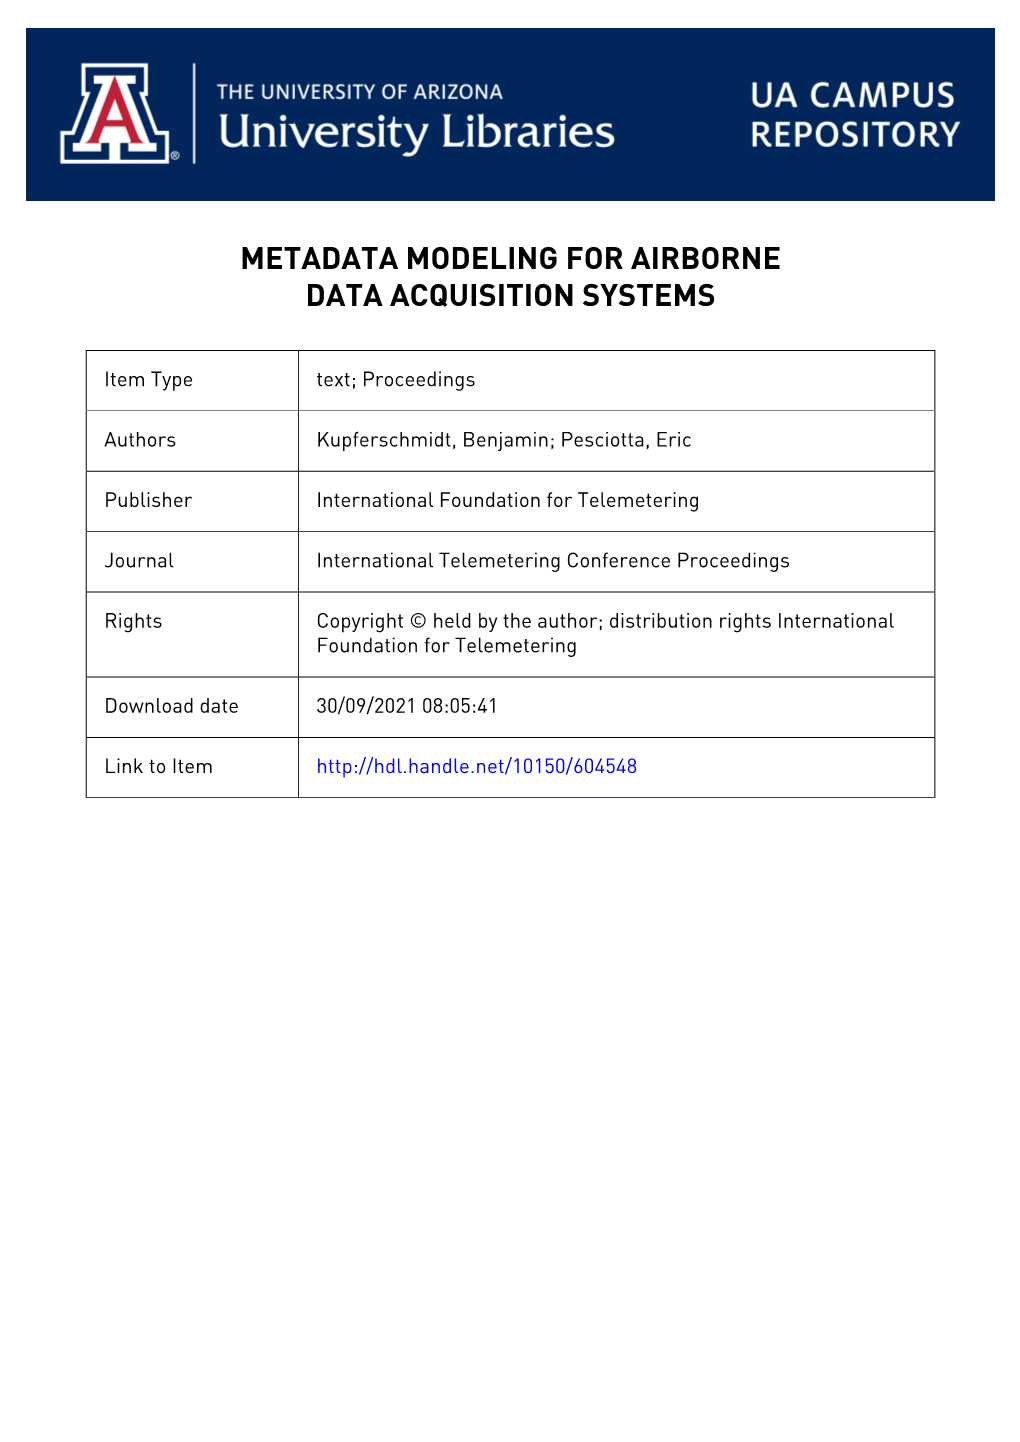 Metadata Modeling for Airborne Data Acquisition Systems